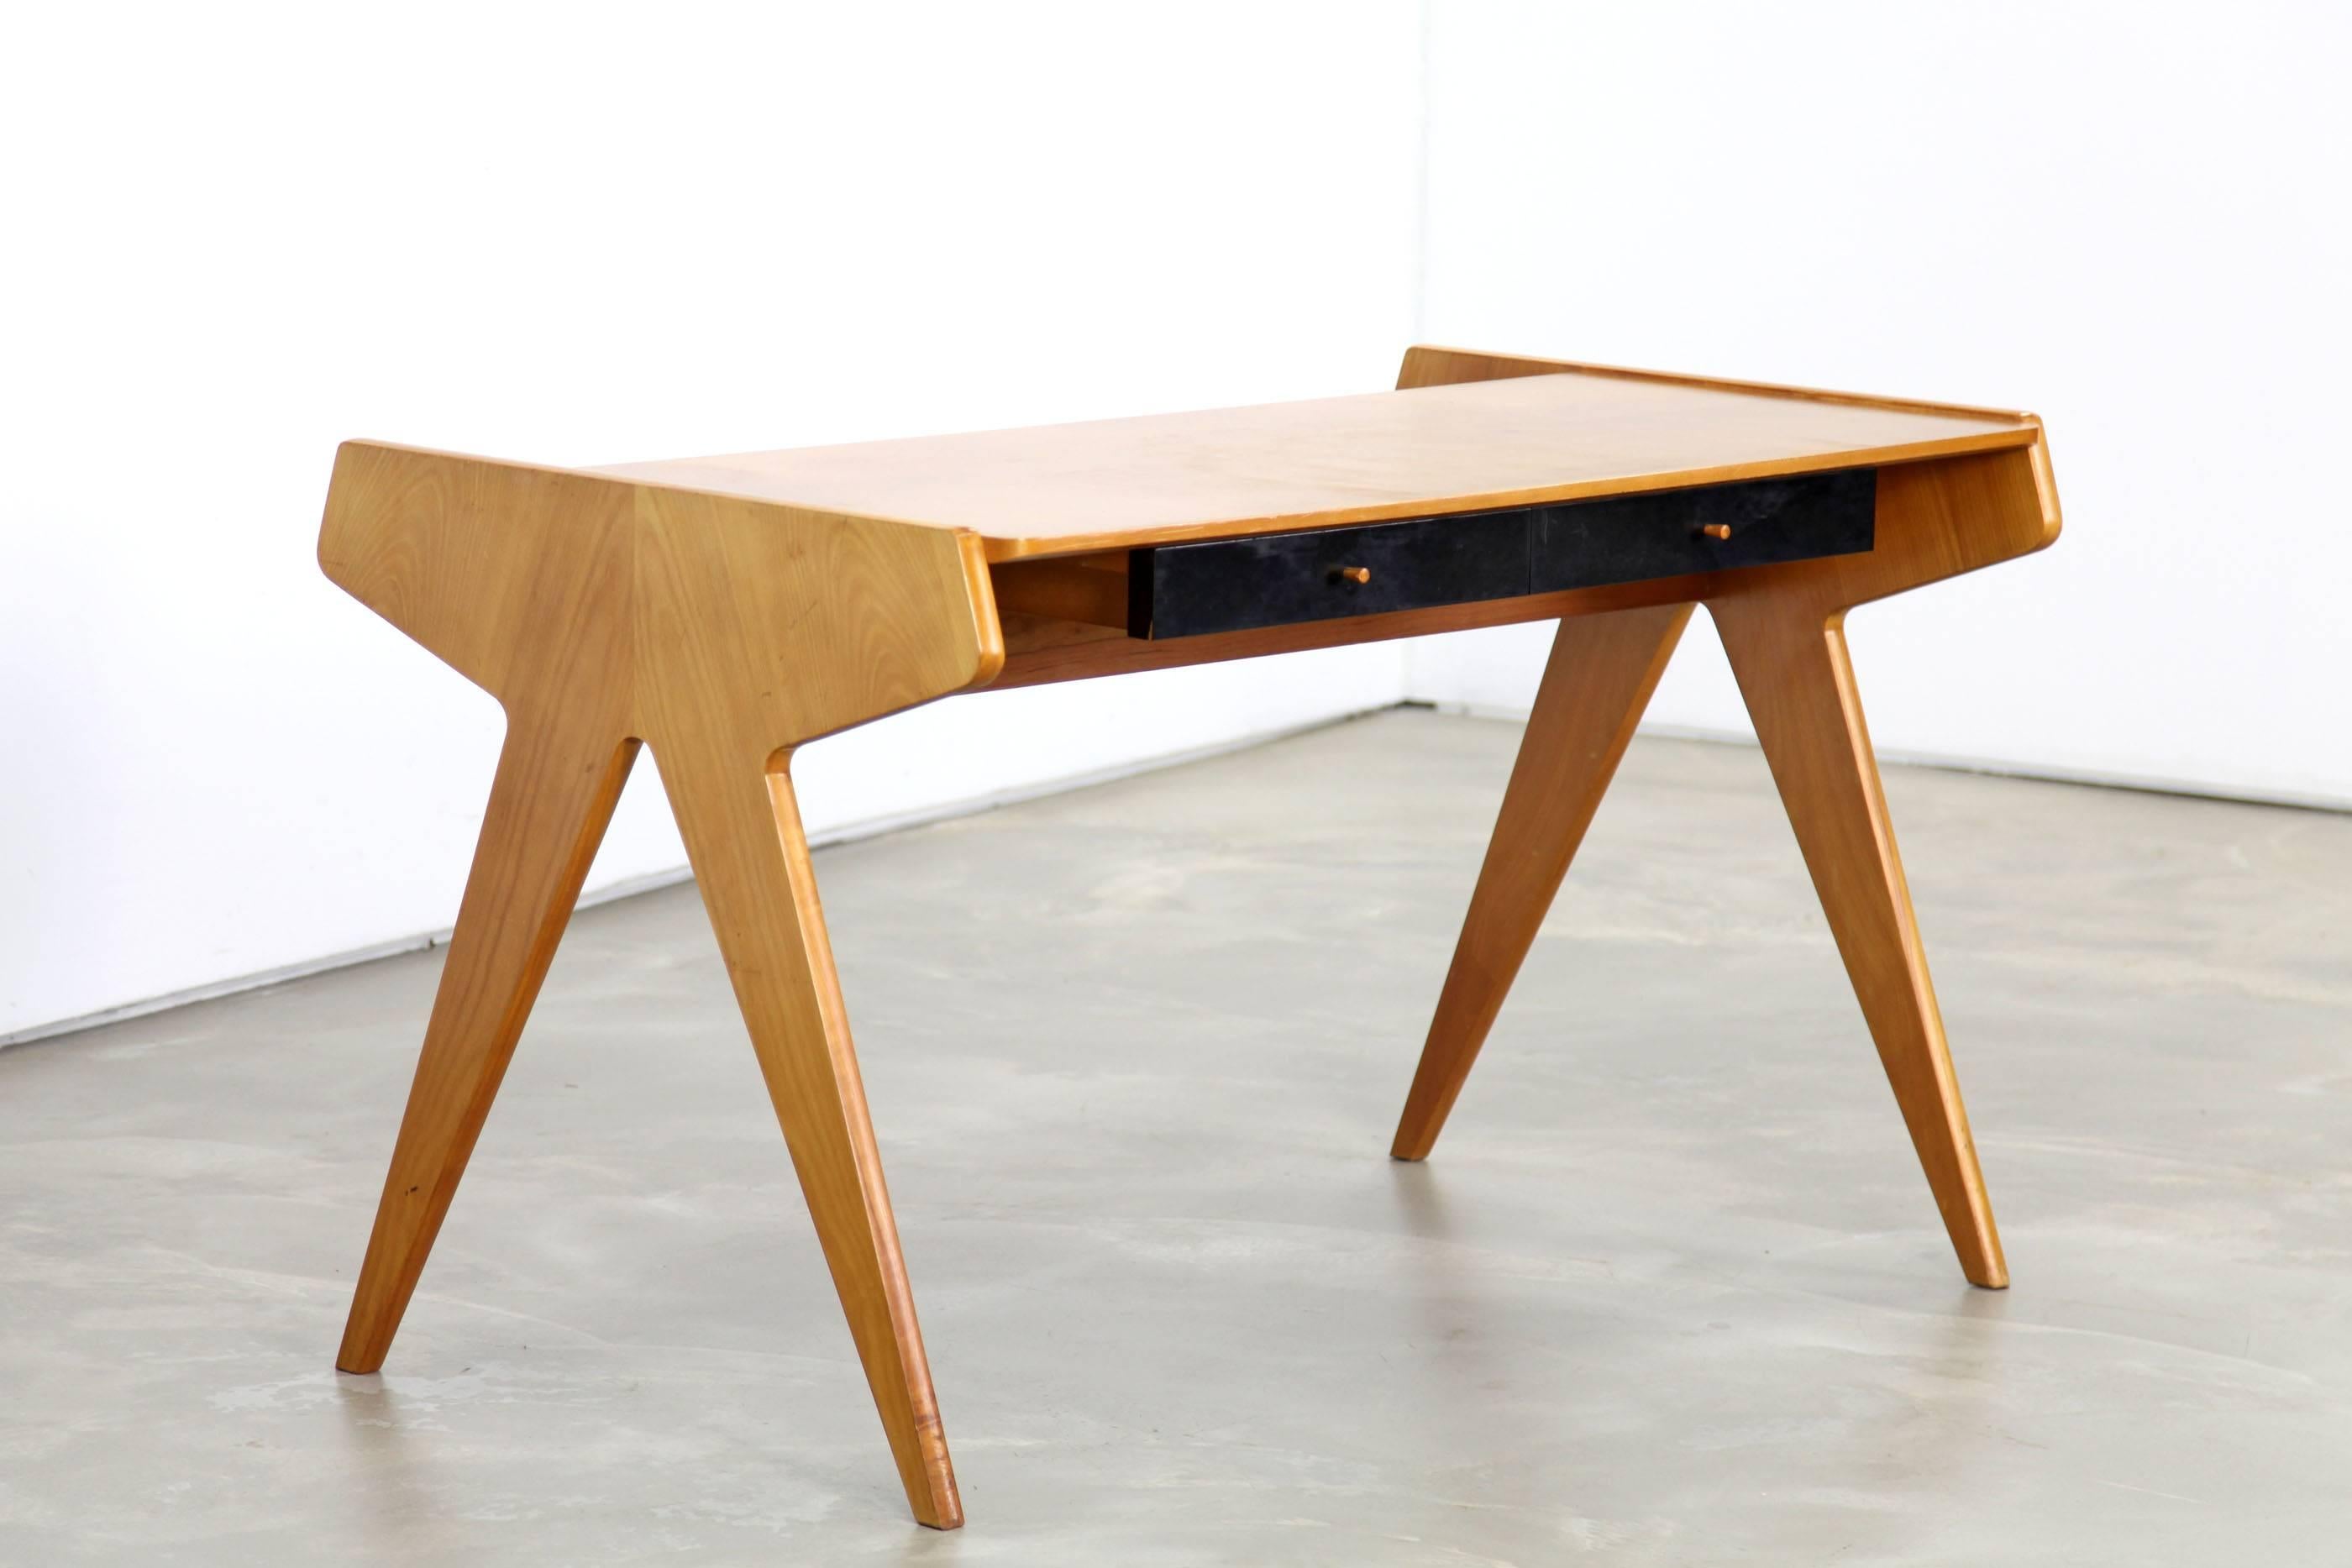 Beautiful cherrywood desk from the 1950s. Pure and simple design by Helmut Magg for WK, Germany. This desk combines functionality and elegance, it features two drawers a bookshelf and "scissor style" legs.